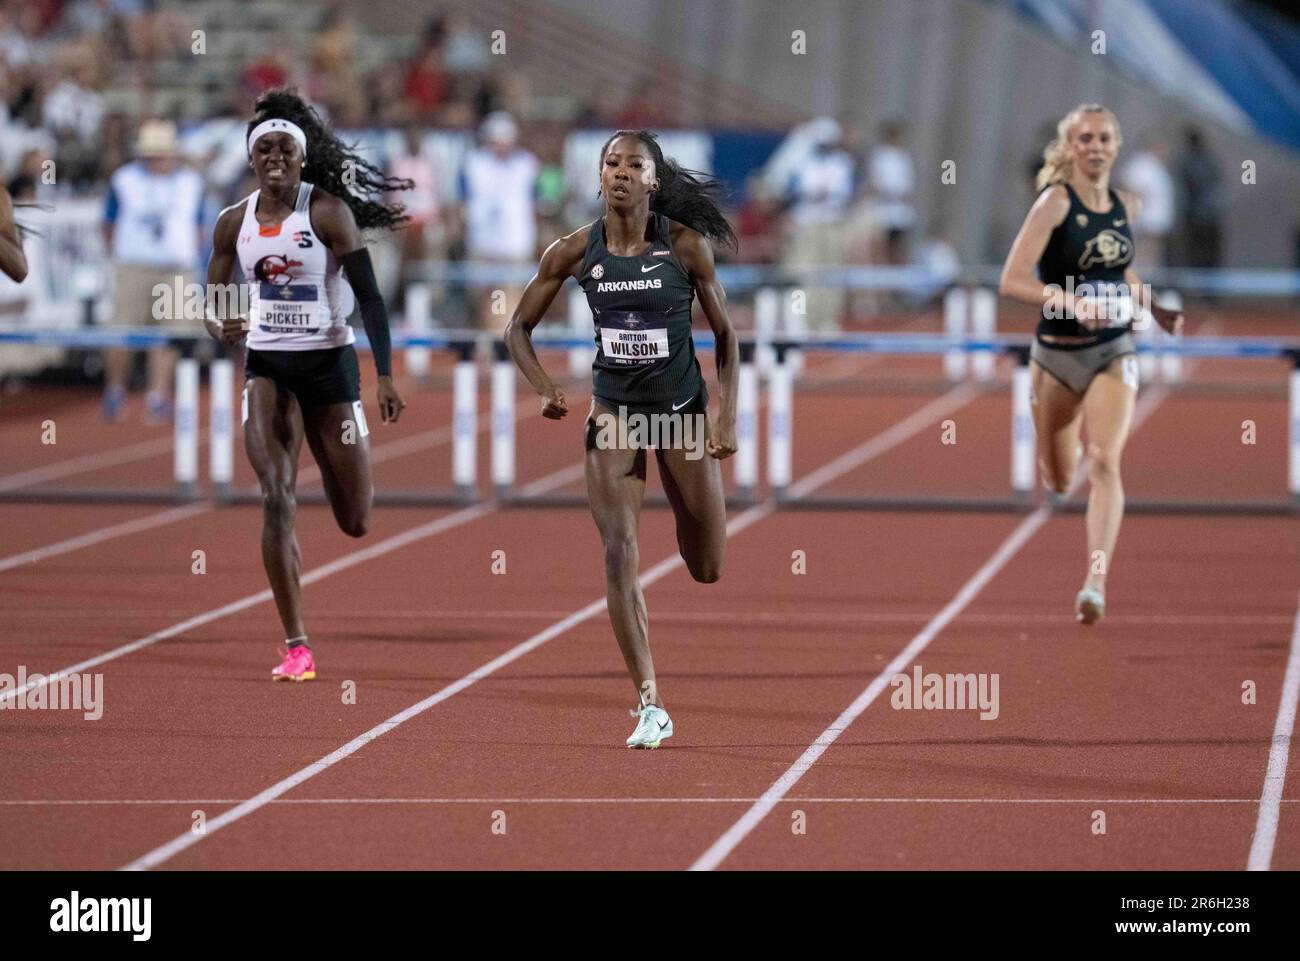 Arkansas' BRITTON WILSON finishes the 400 meter hurdles in women's semifinal action at the NCAA Division 1 Track & Field Championships in Austin on June 8, 2023 Credit: Bob Daemmrich/Alamy Live News Stock Photo